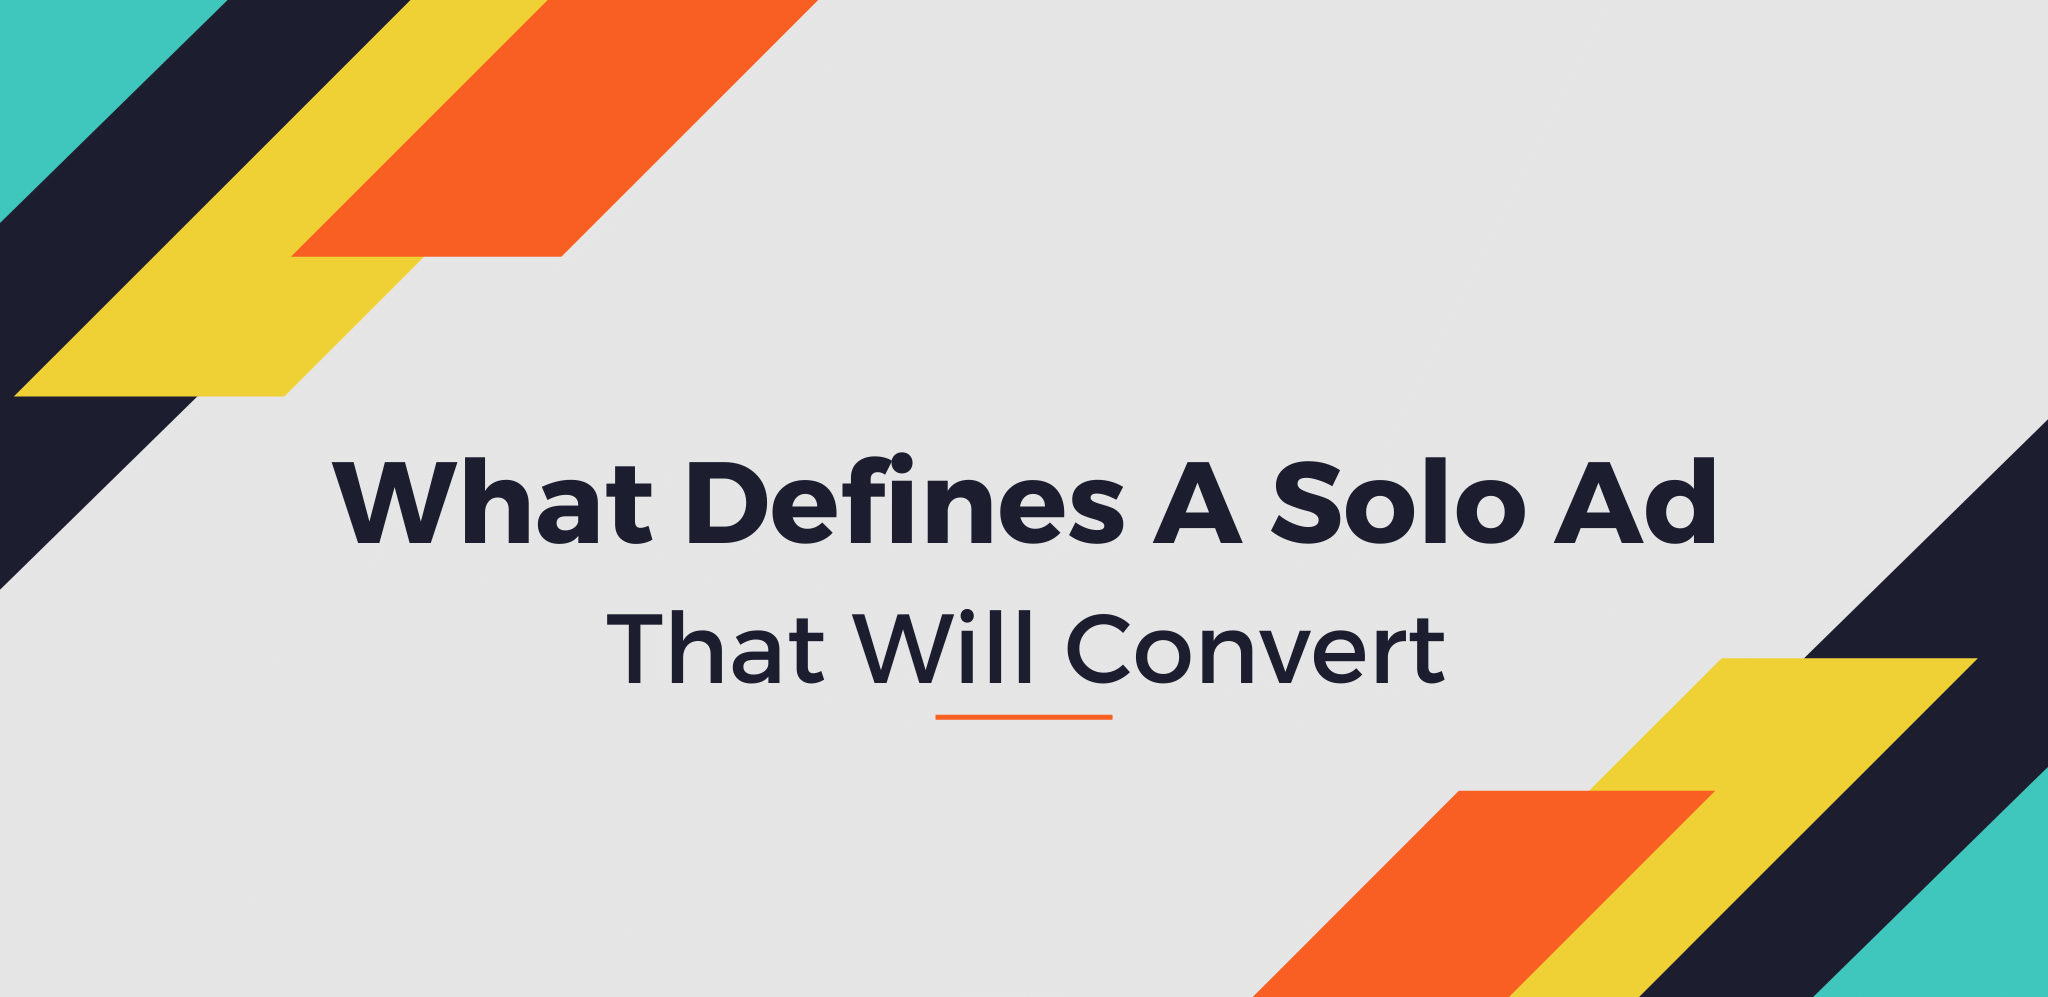 What Defines A Solo Ad That Will Convert